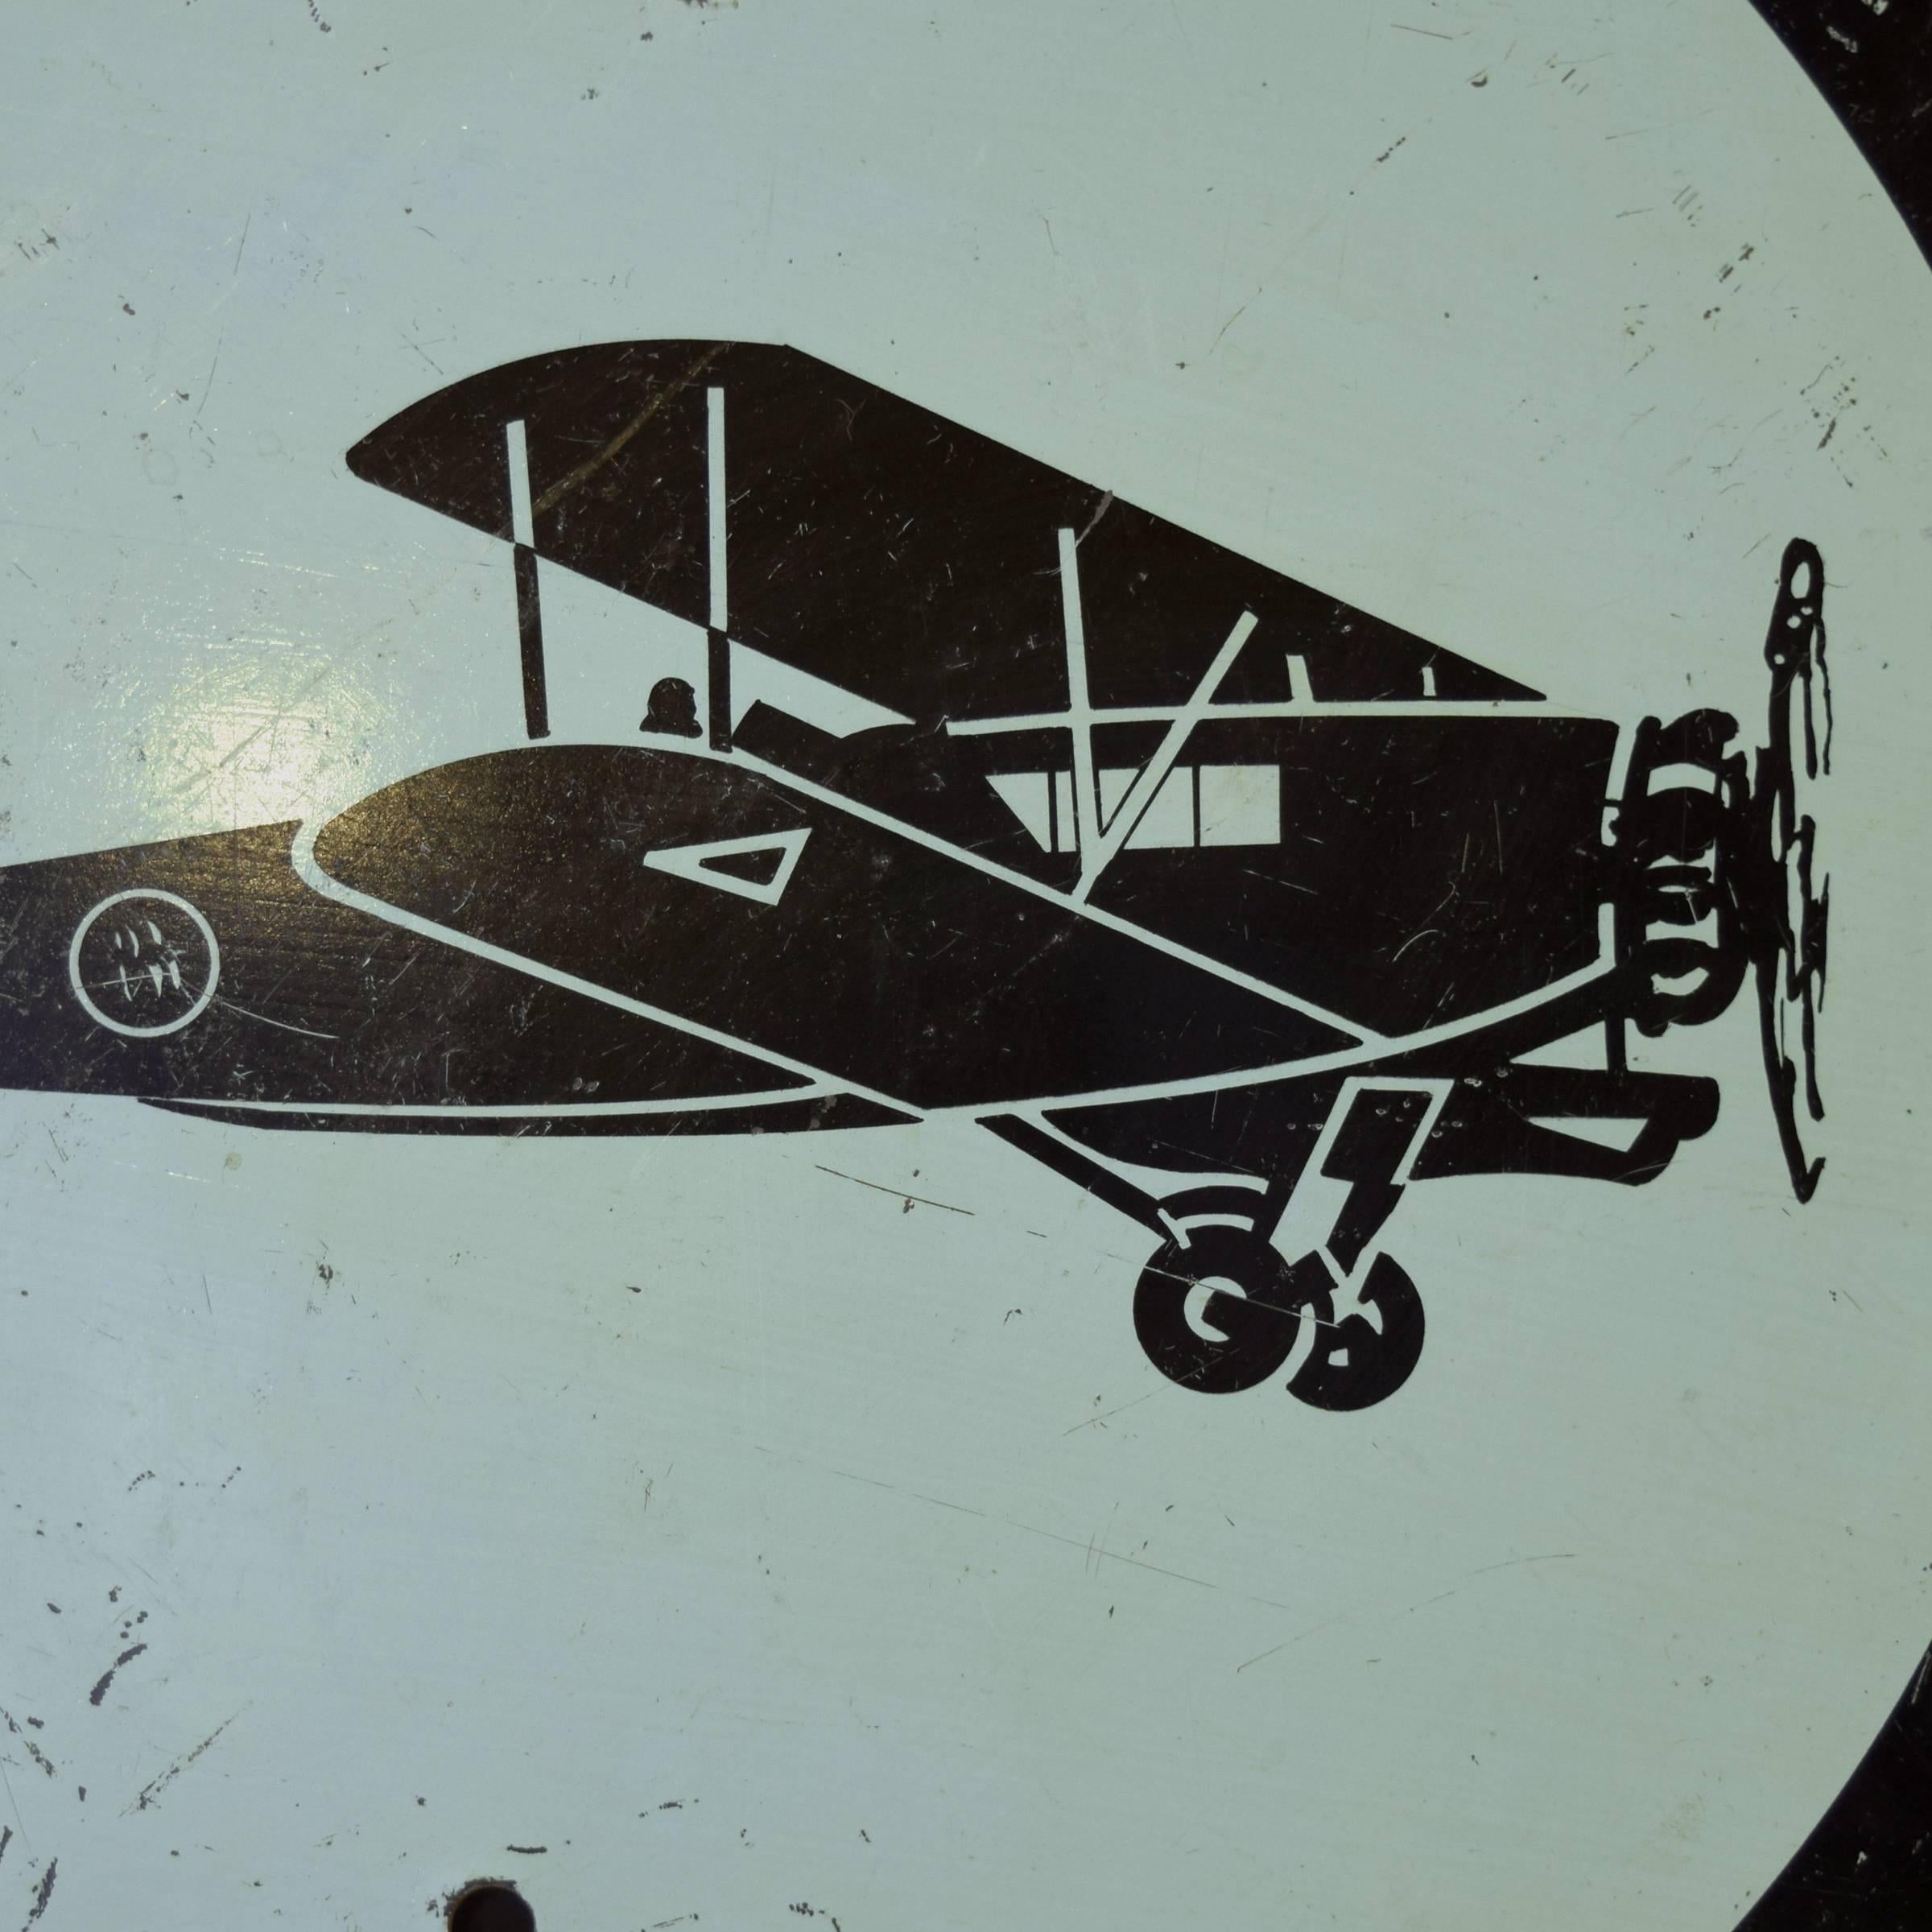 An extremely rare circular metal sign depicting an airplane from the 1933 Chicago World's Fair, manufactured by the Green Duck Metal Stamping Company of Chicago. These signs were places on street lamps around the fair, which focused on the